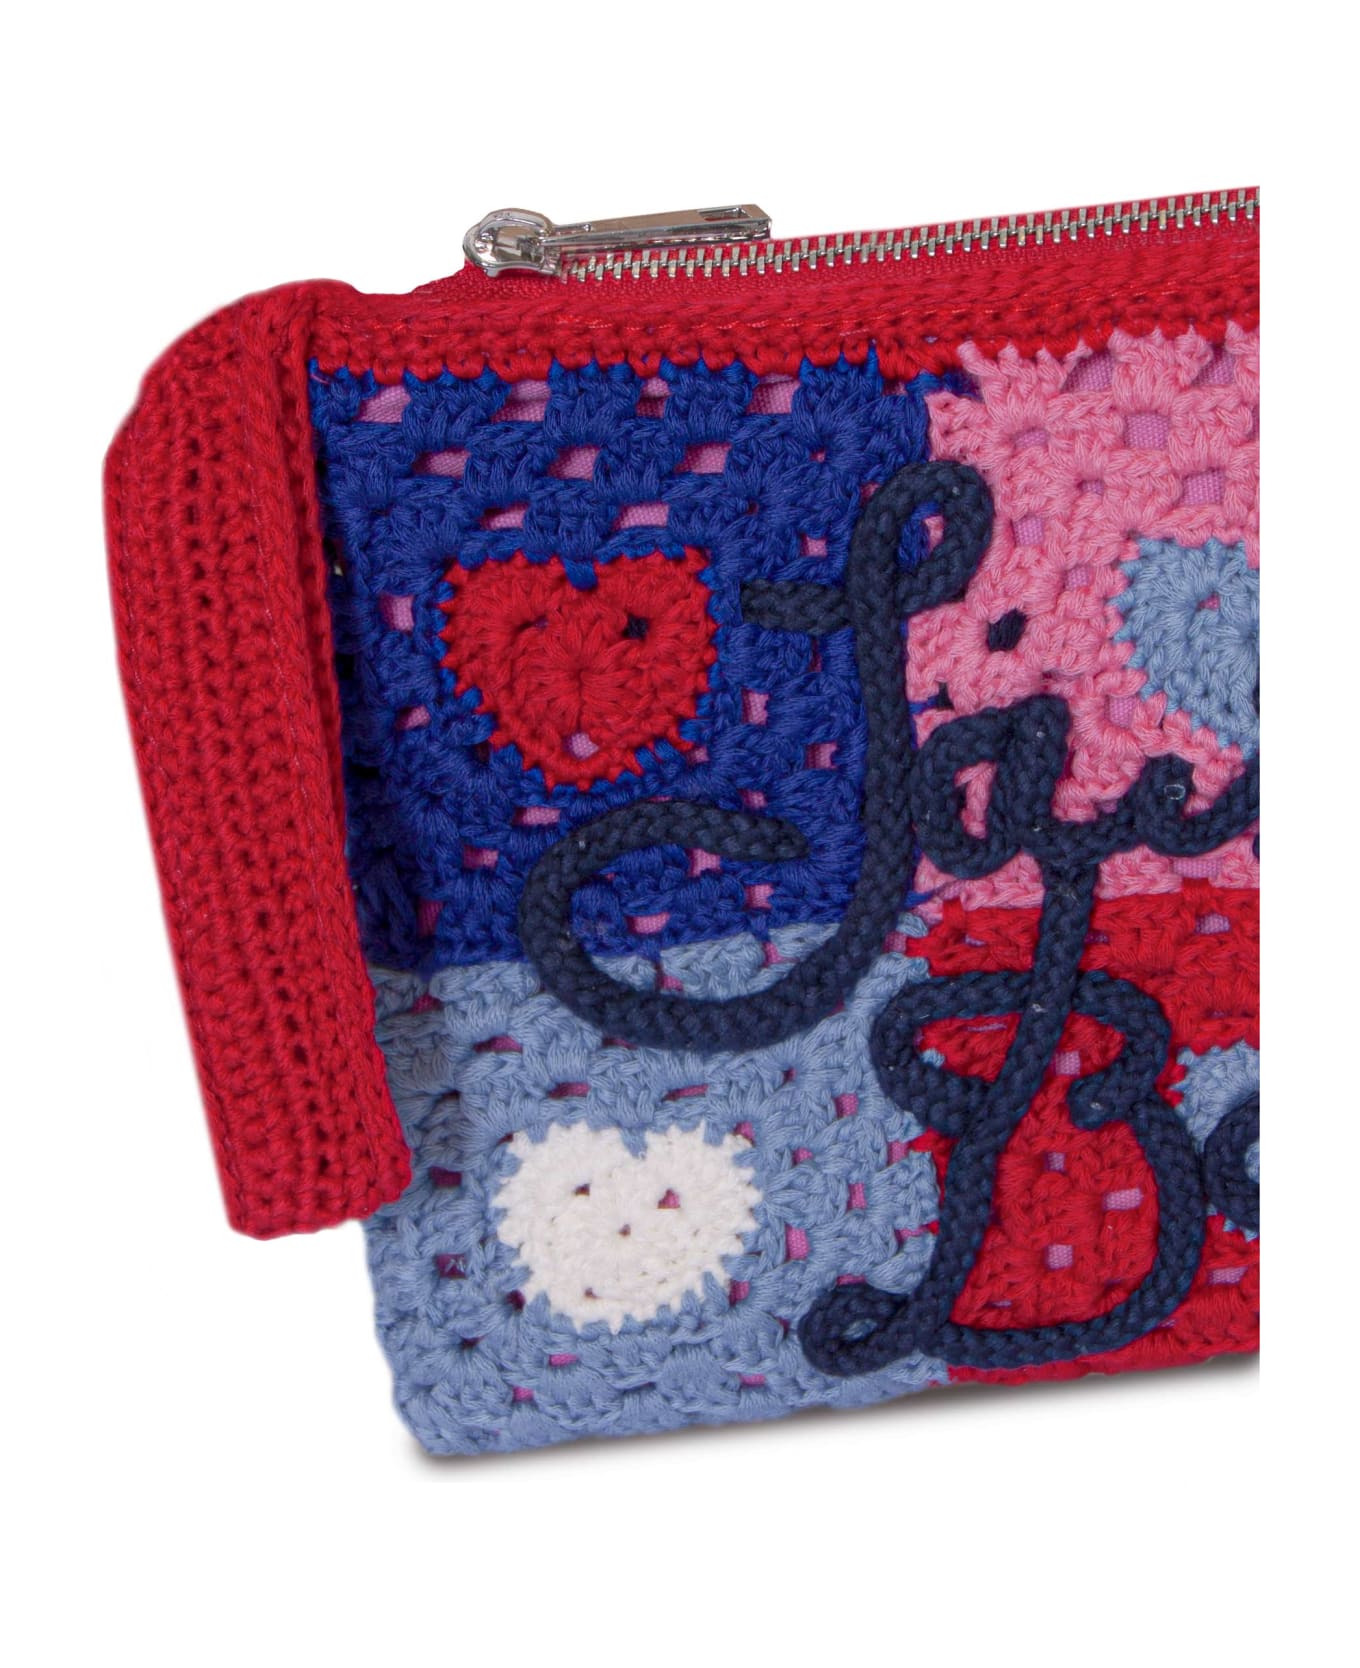 MC2 Saint Barth Parisienne Crochet Pouch Bag With Heart Embroidery - RED